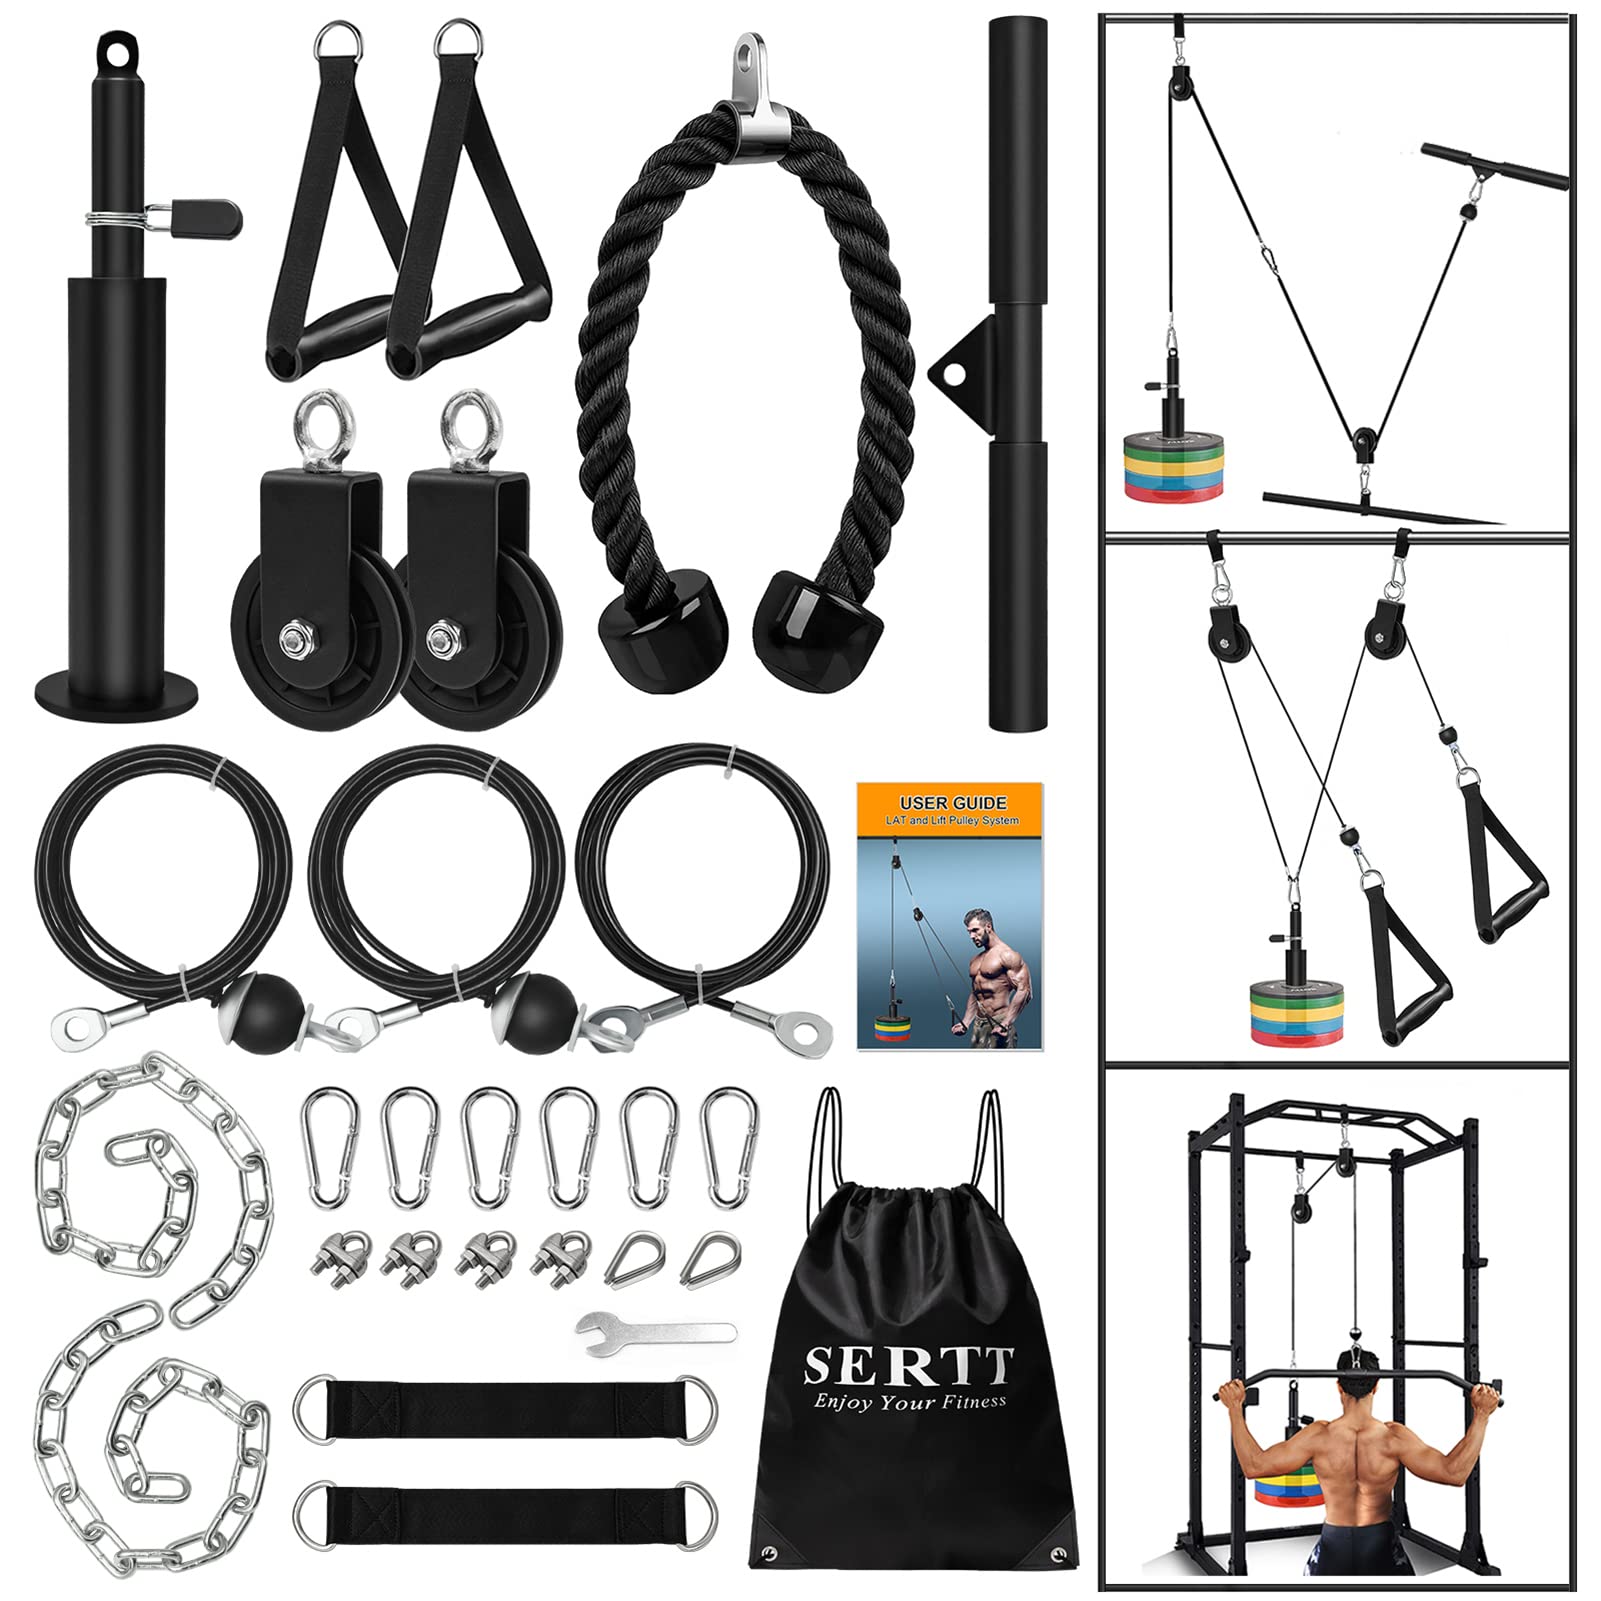 Weight Cable Pulley System Gym, SERTT Upgraded Cable Pulley